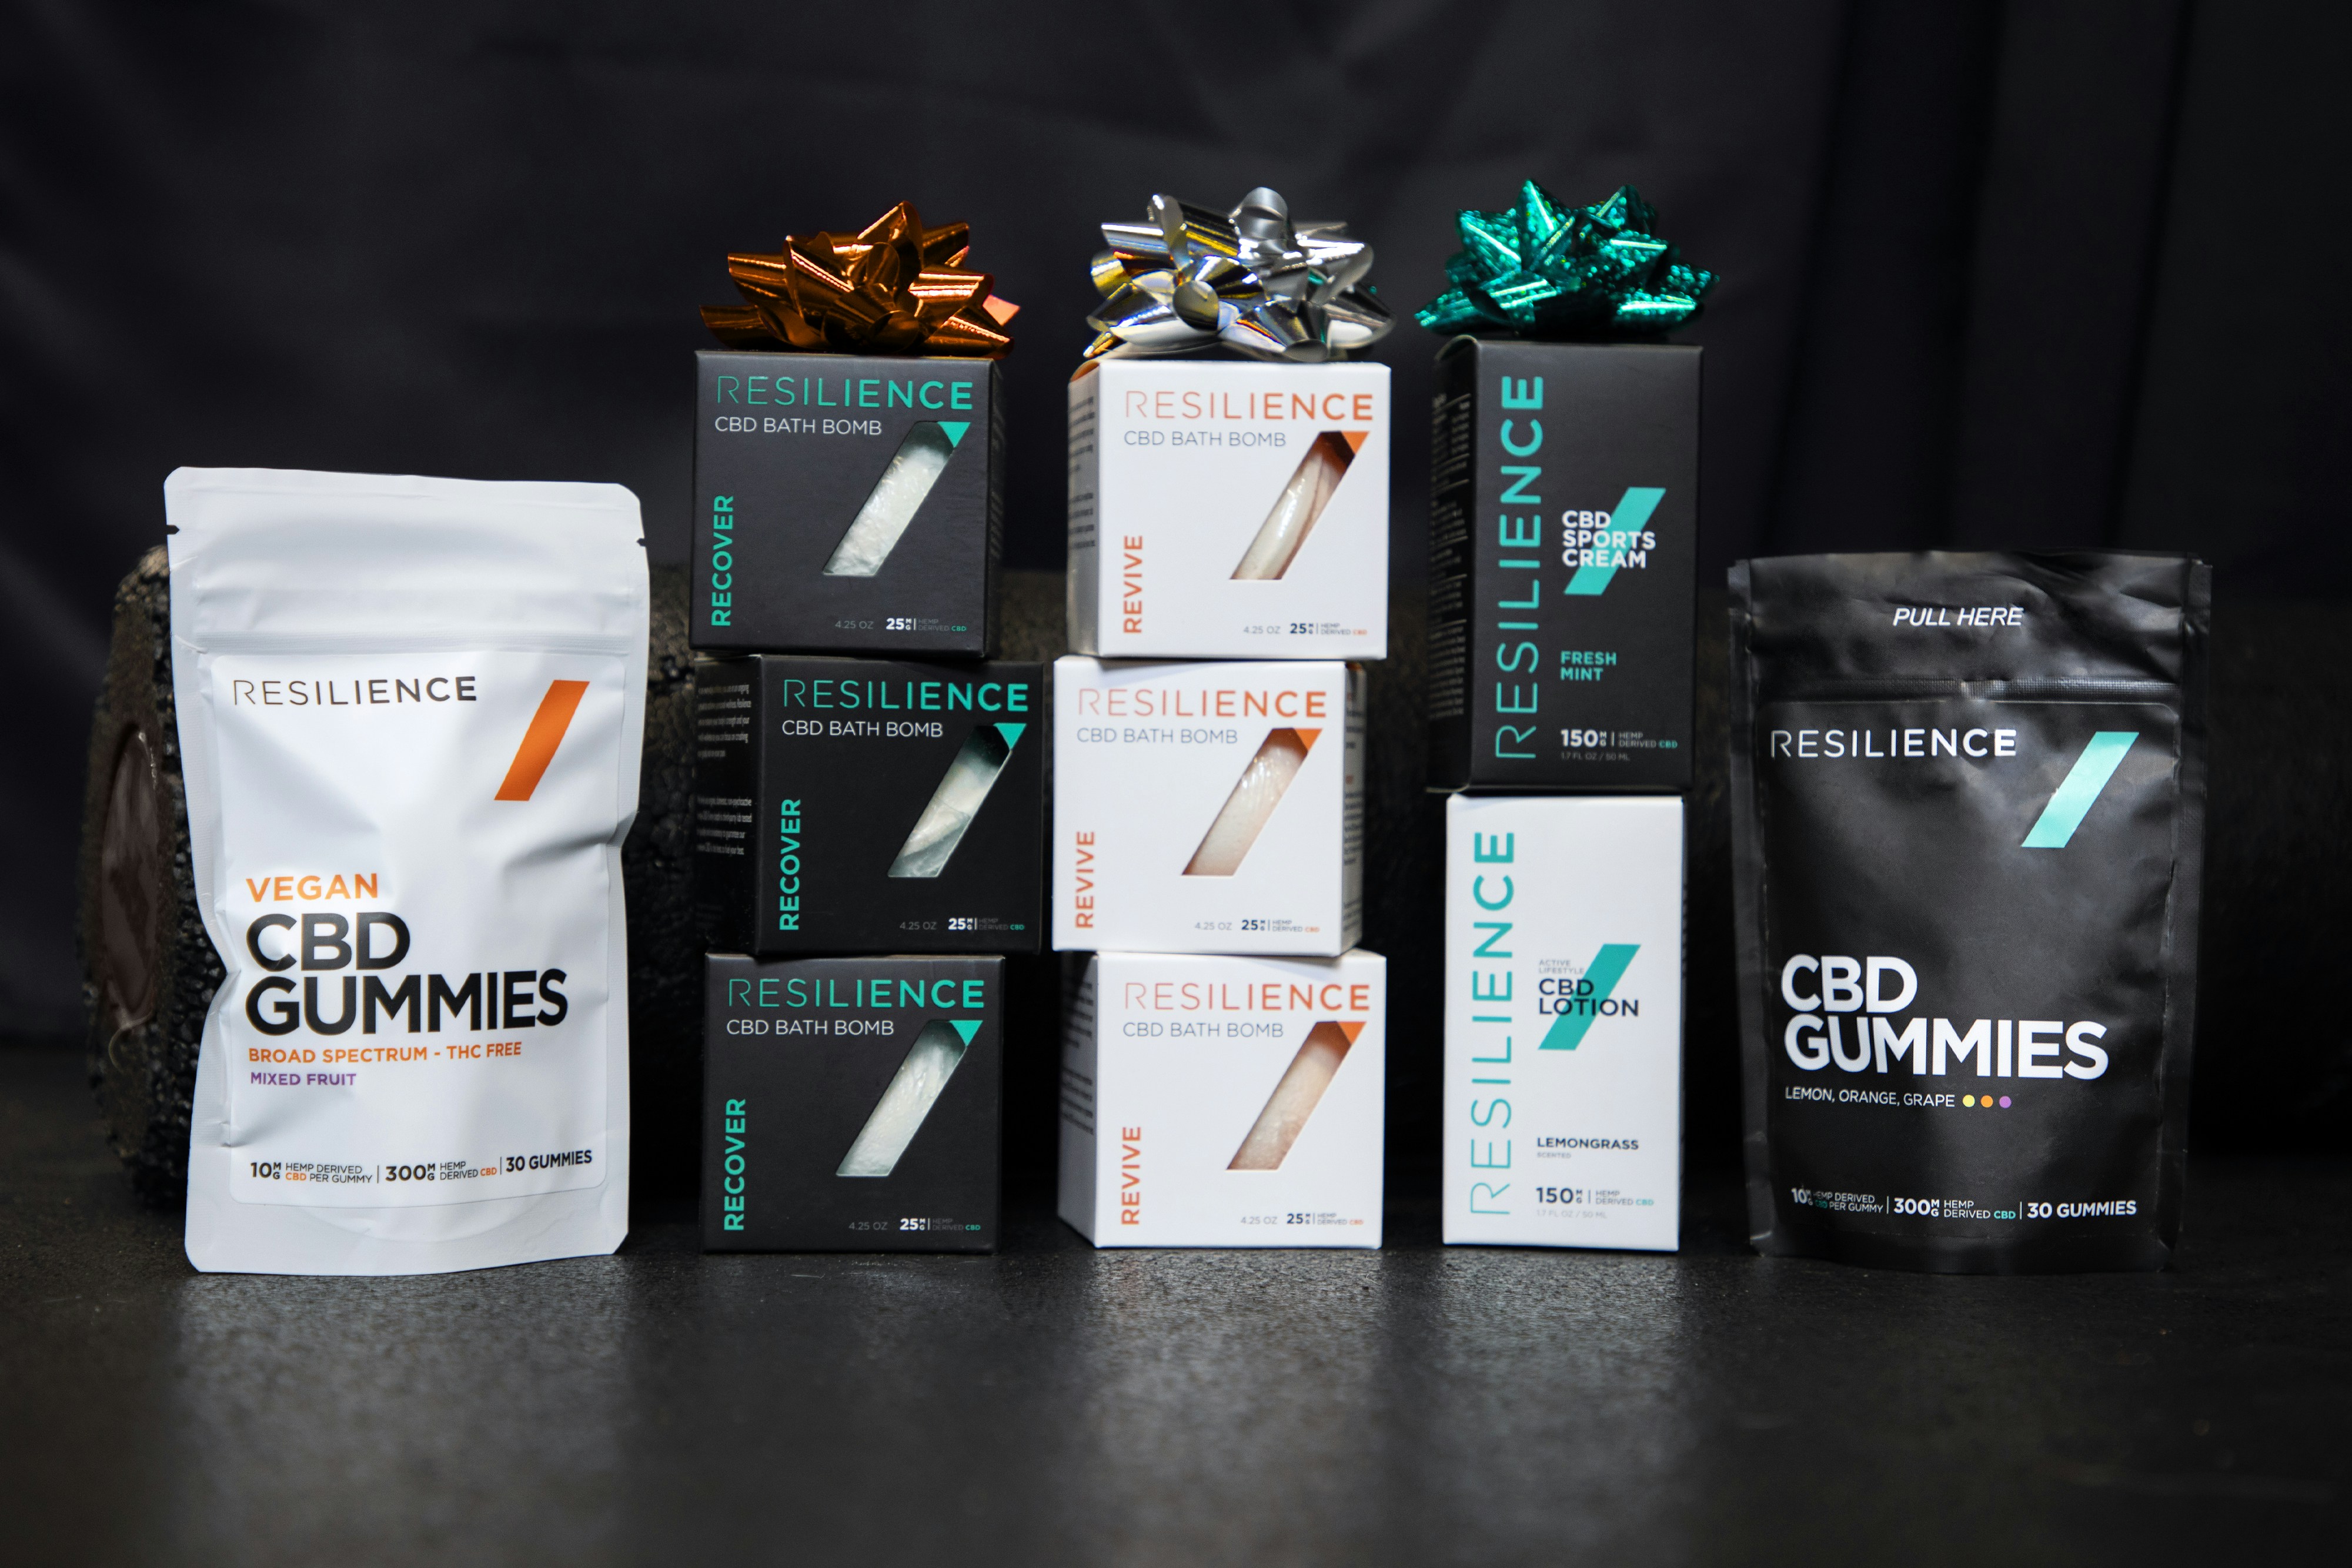 Resilience CBD products with black background and fitness equipment.